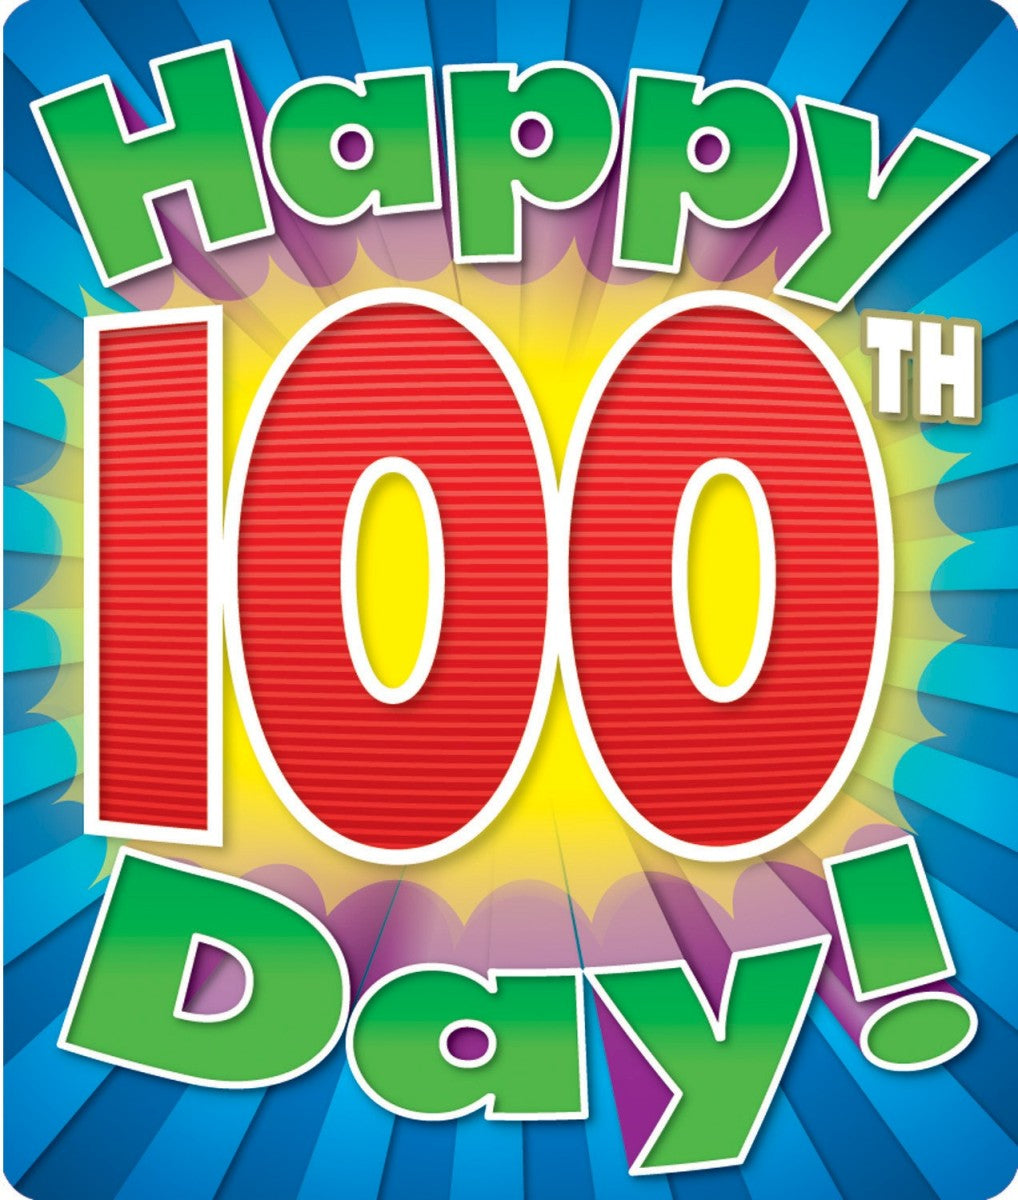 Happy 100th Day Sticker Badges